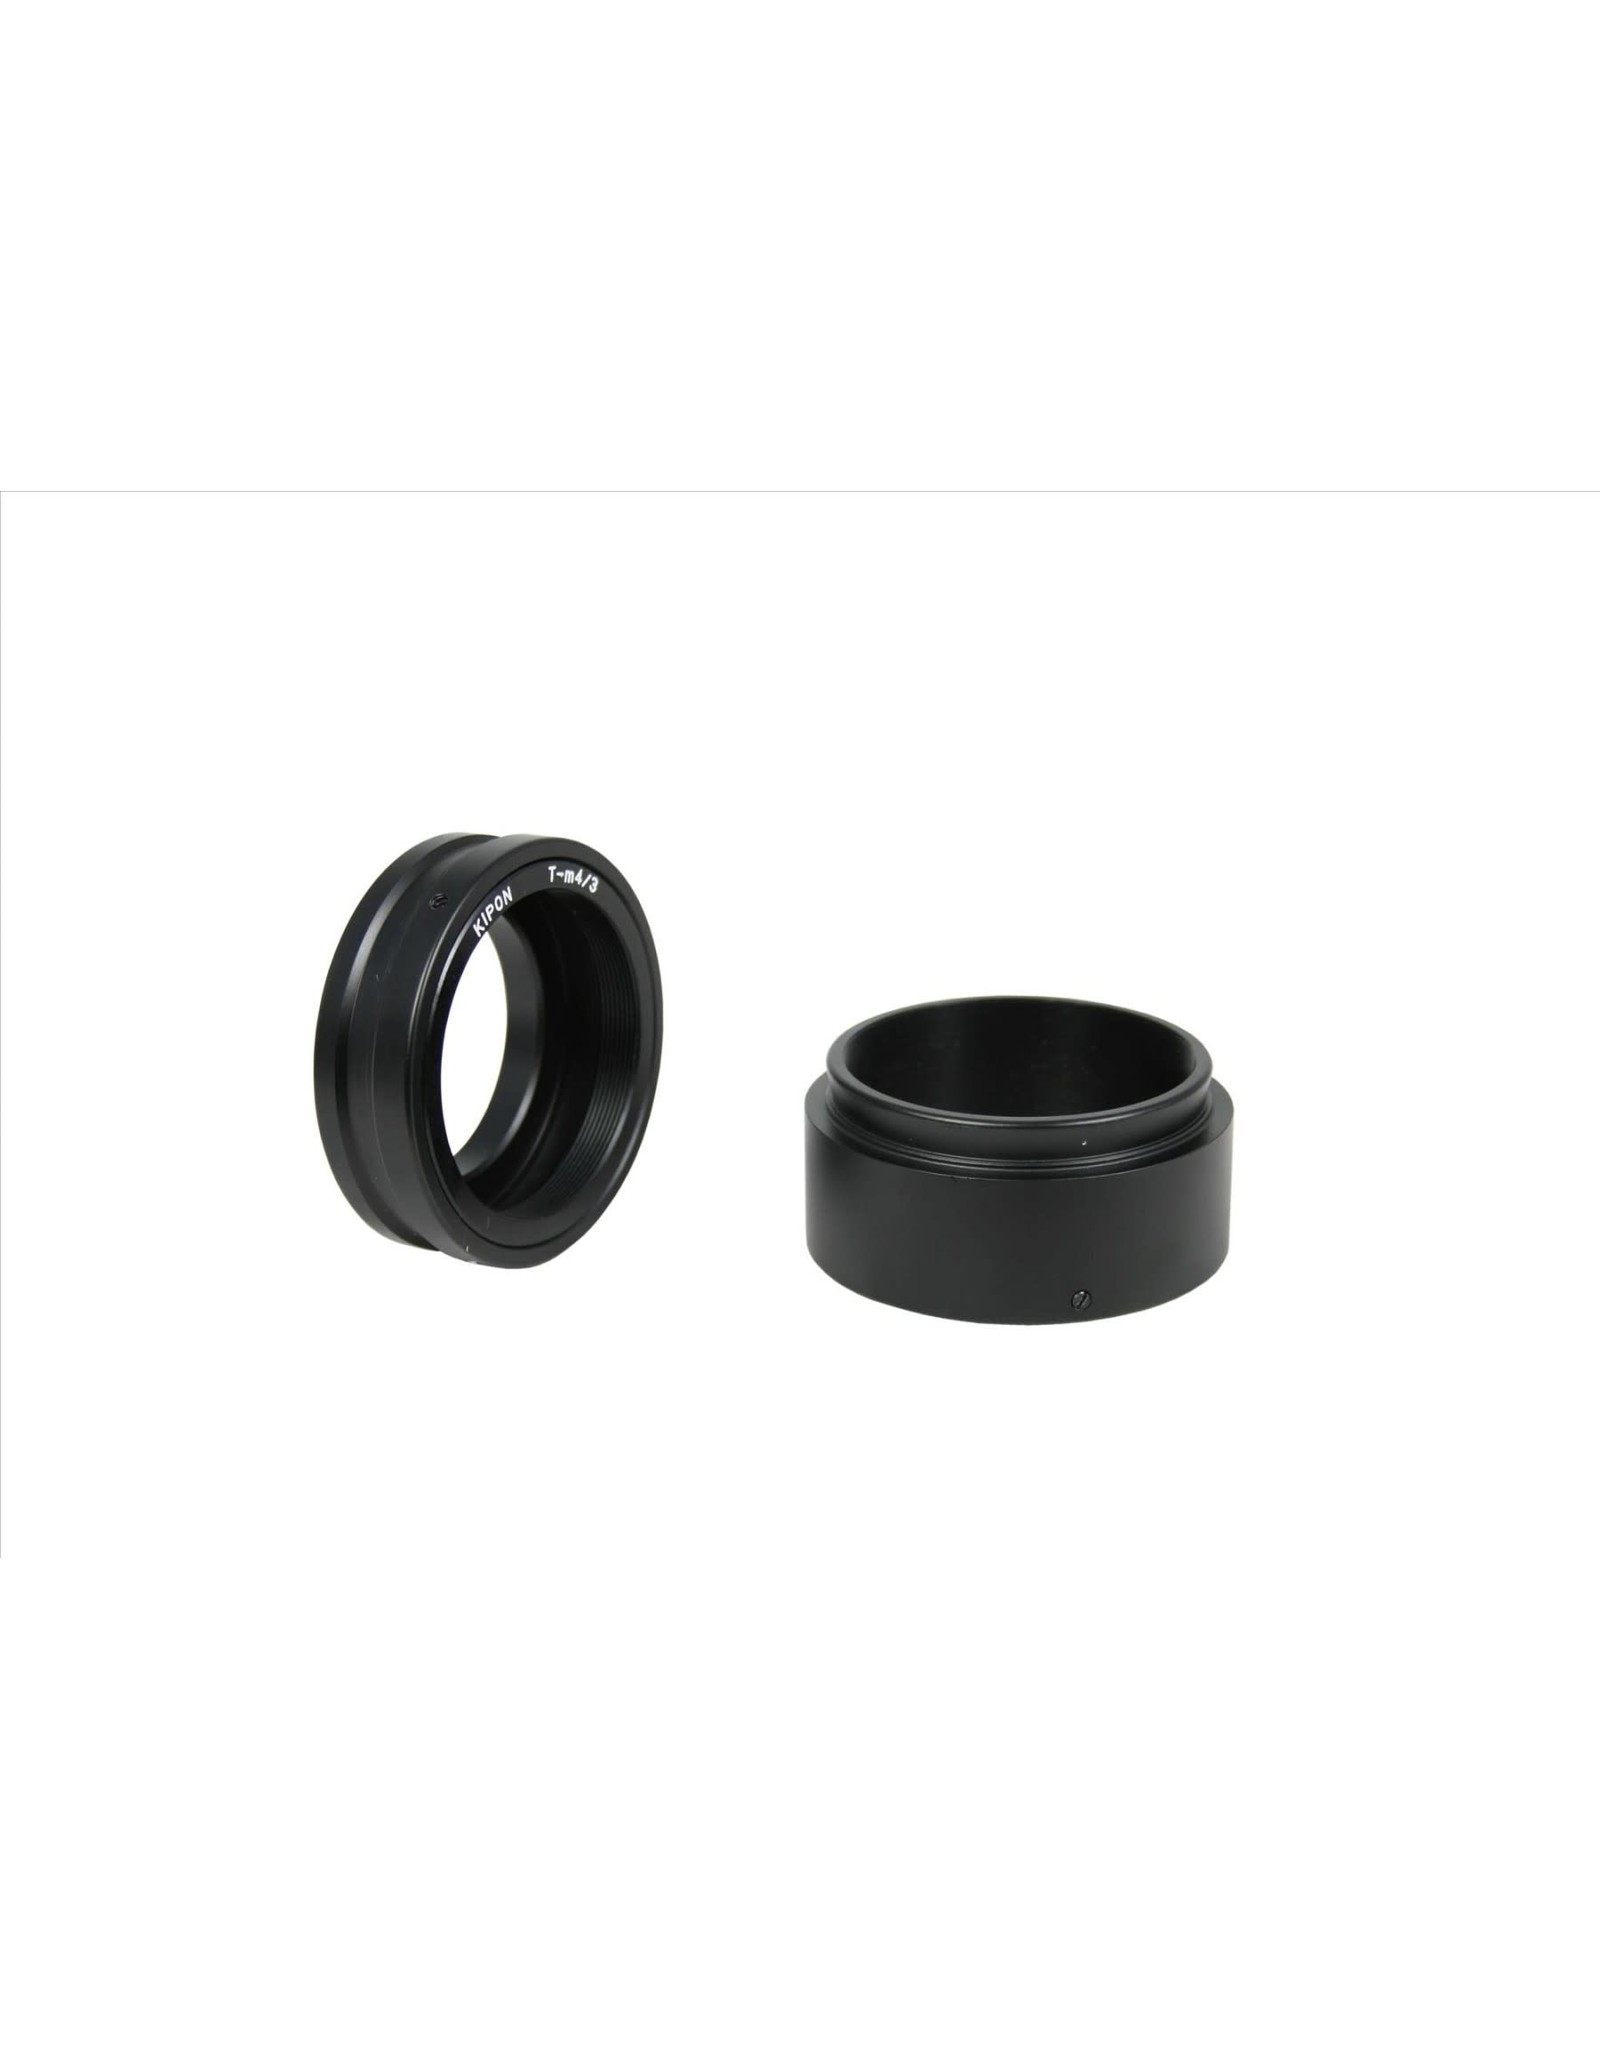 Baader Planetarium Baader T-Ring Micro Four Thirds (m/3) to T-2 + 19mm expansion